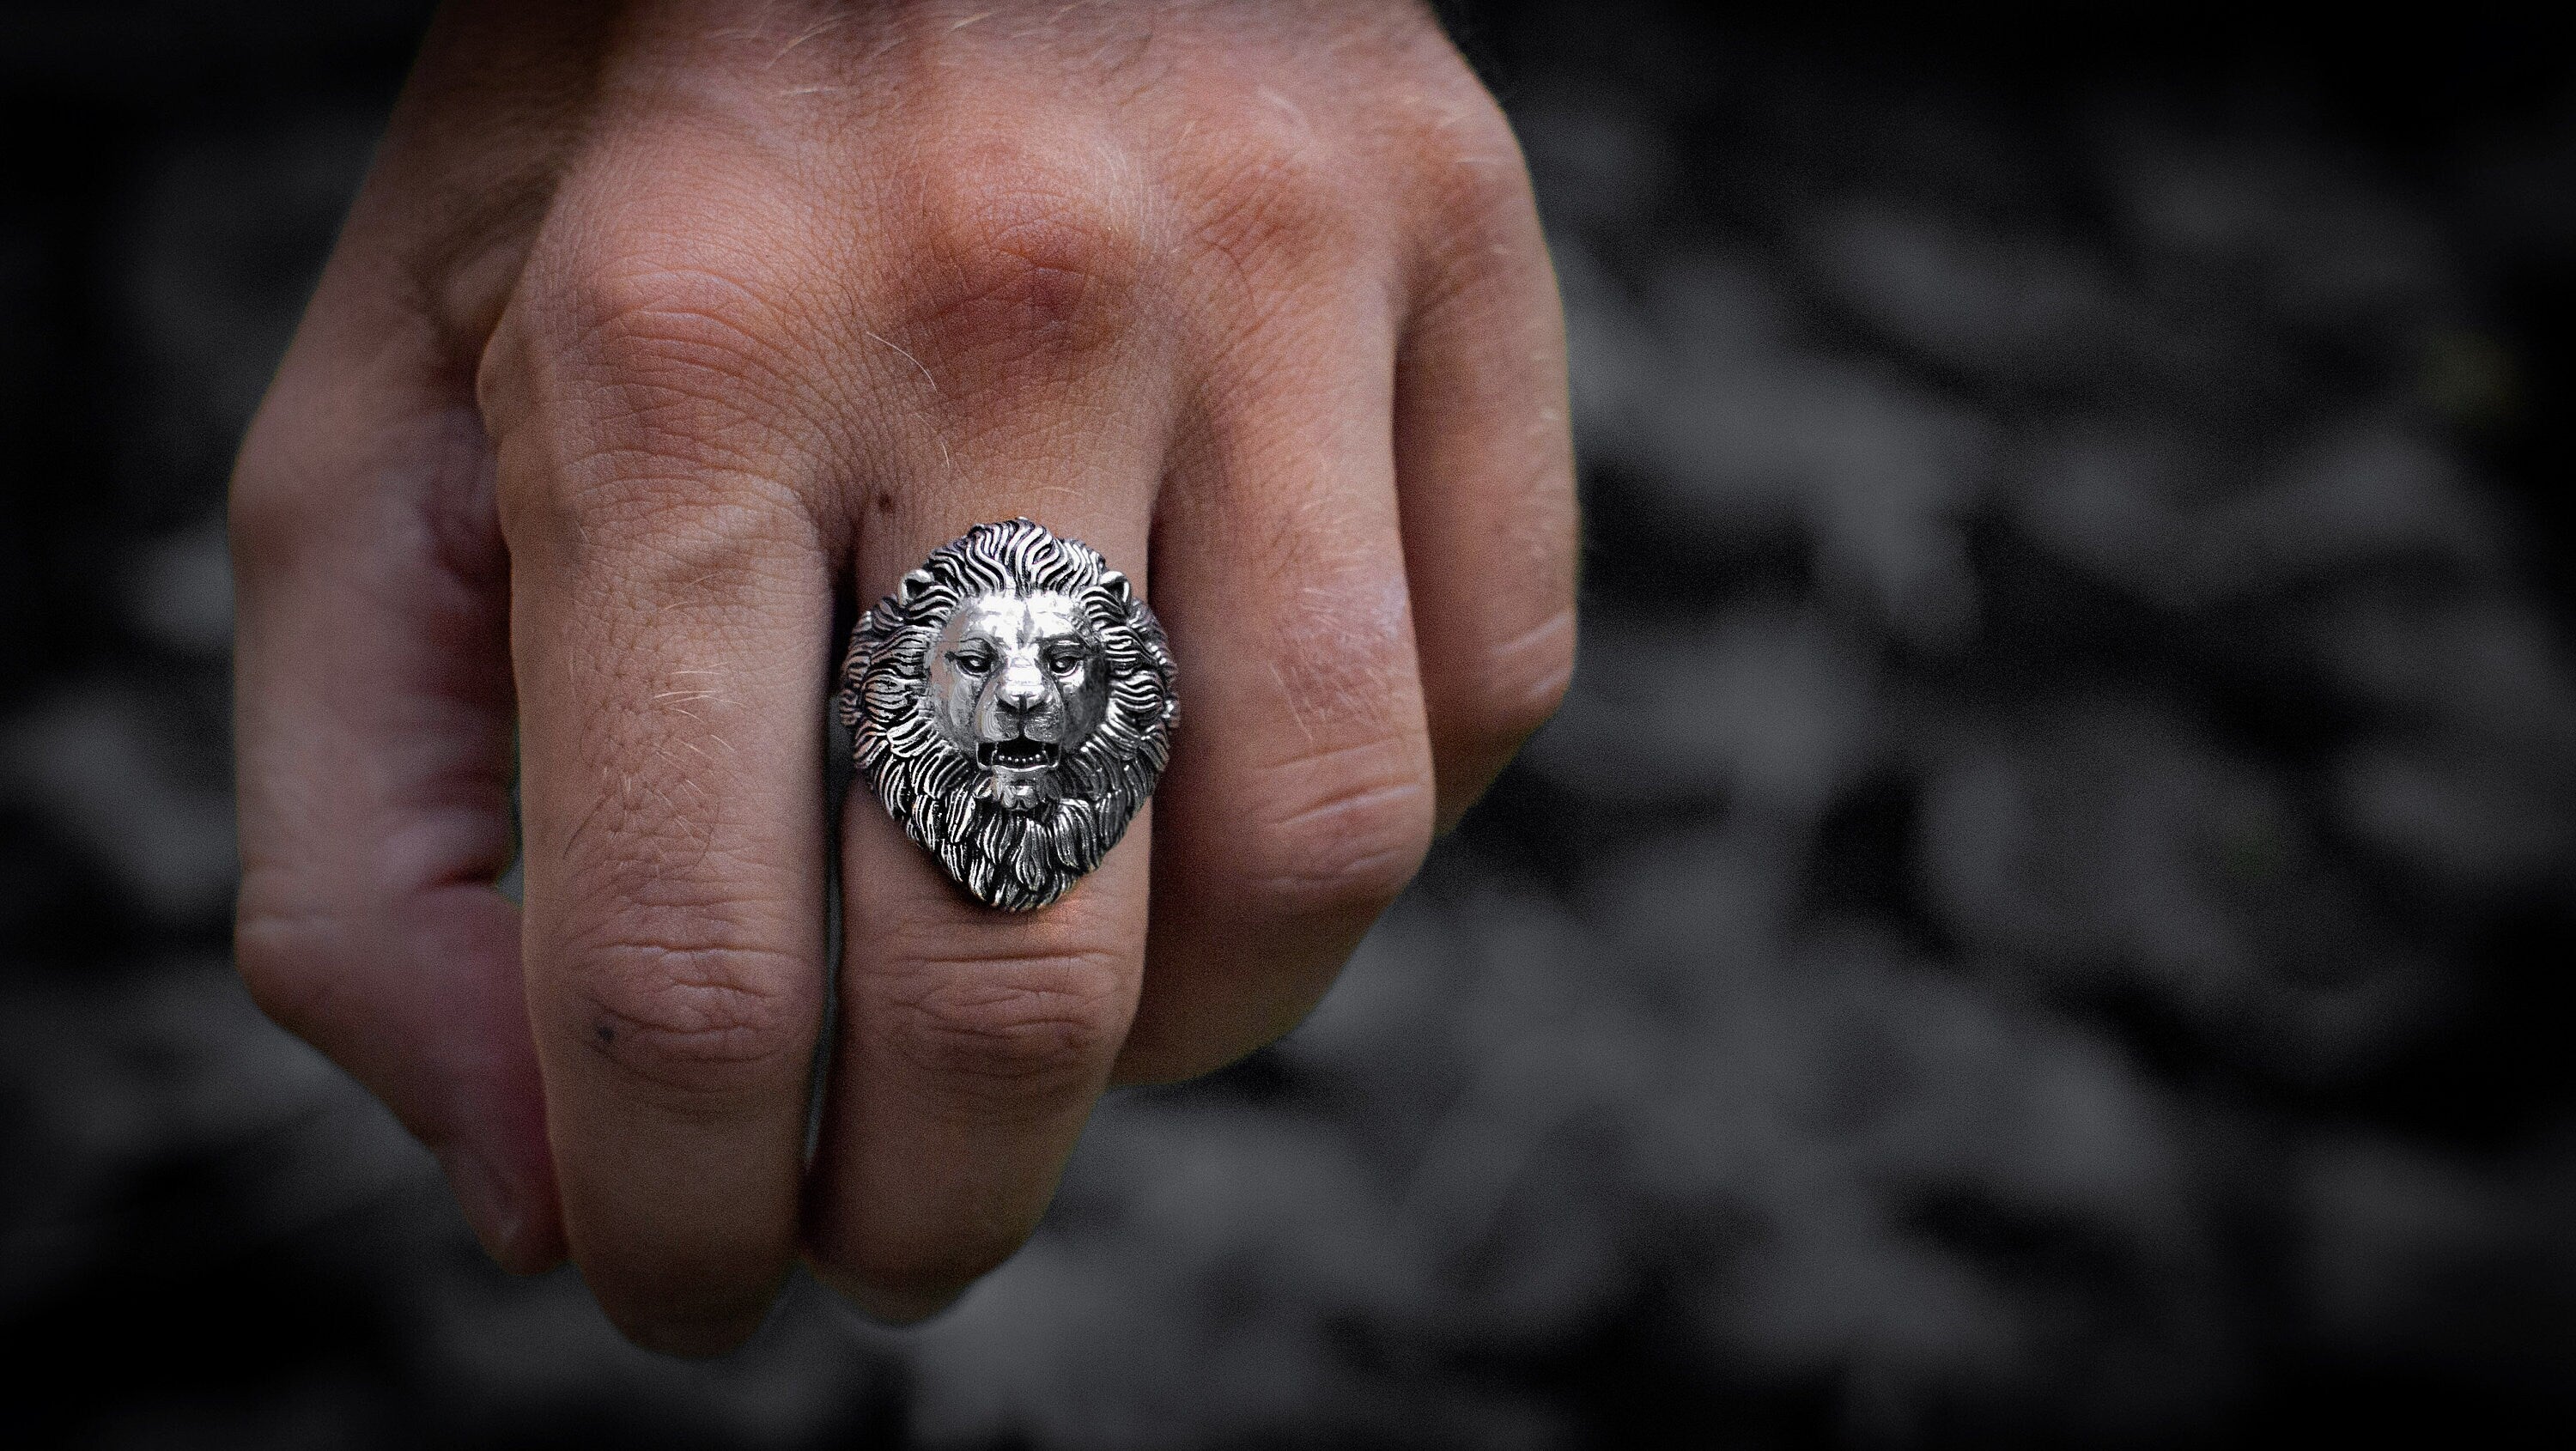 Silver Lion Head ring